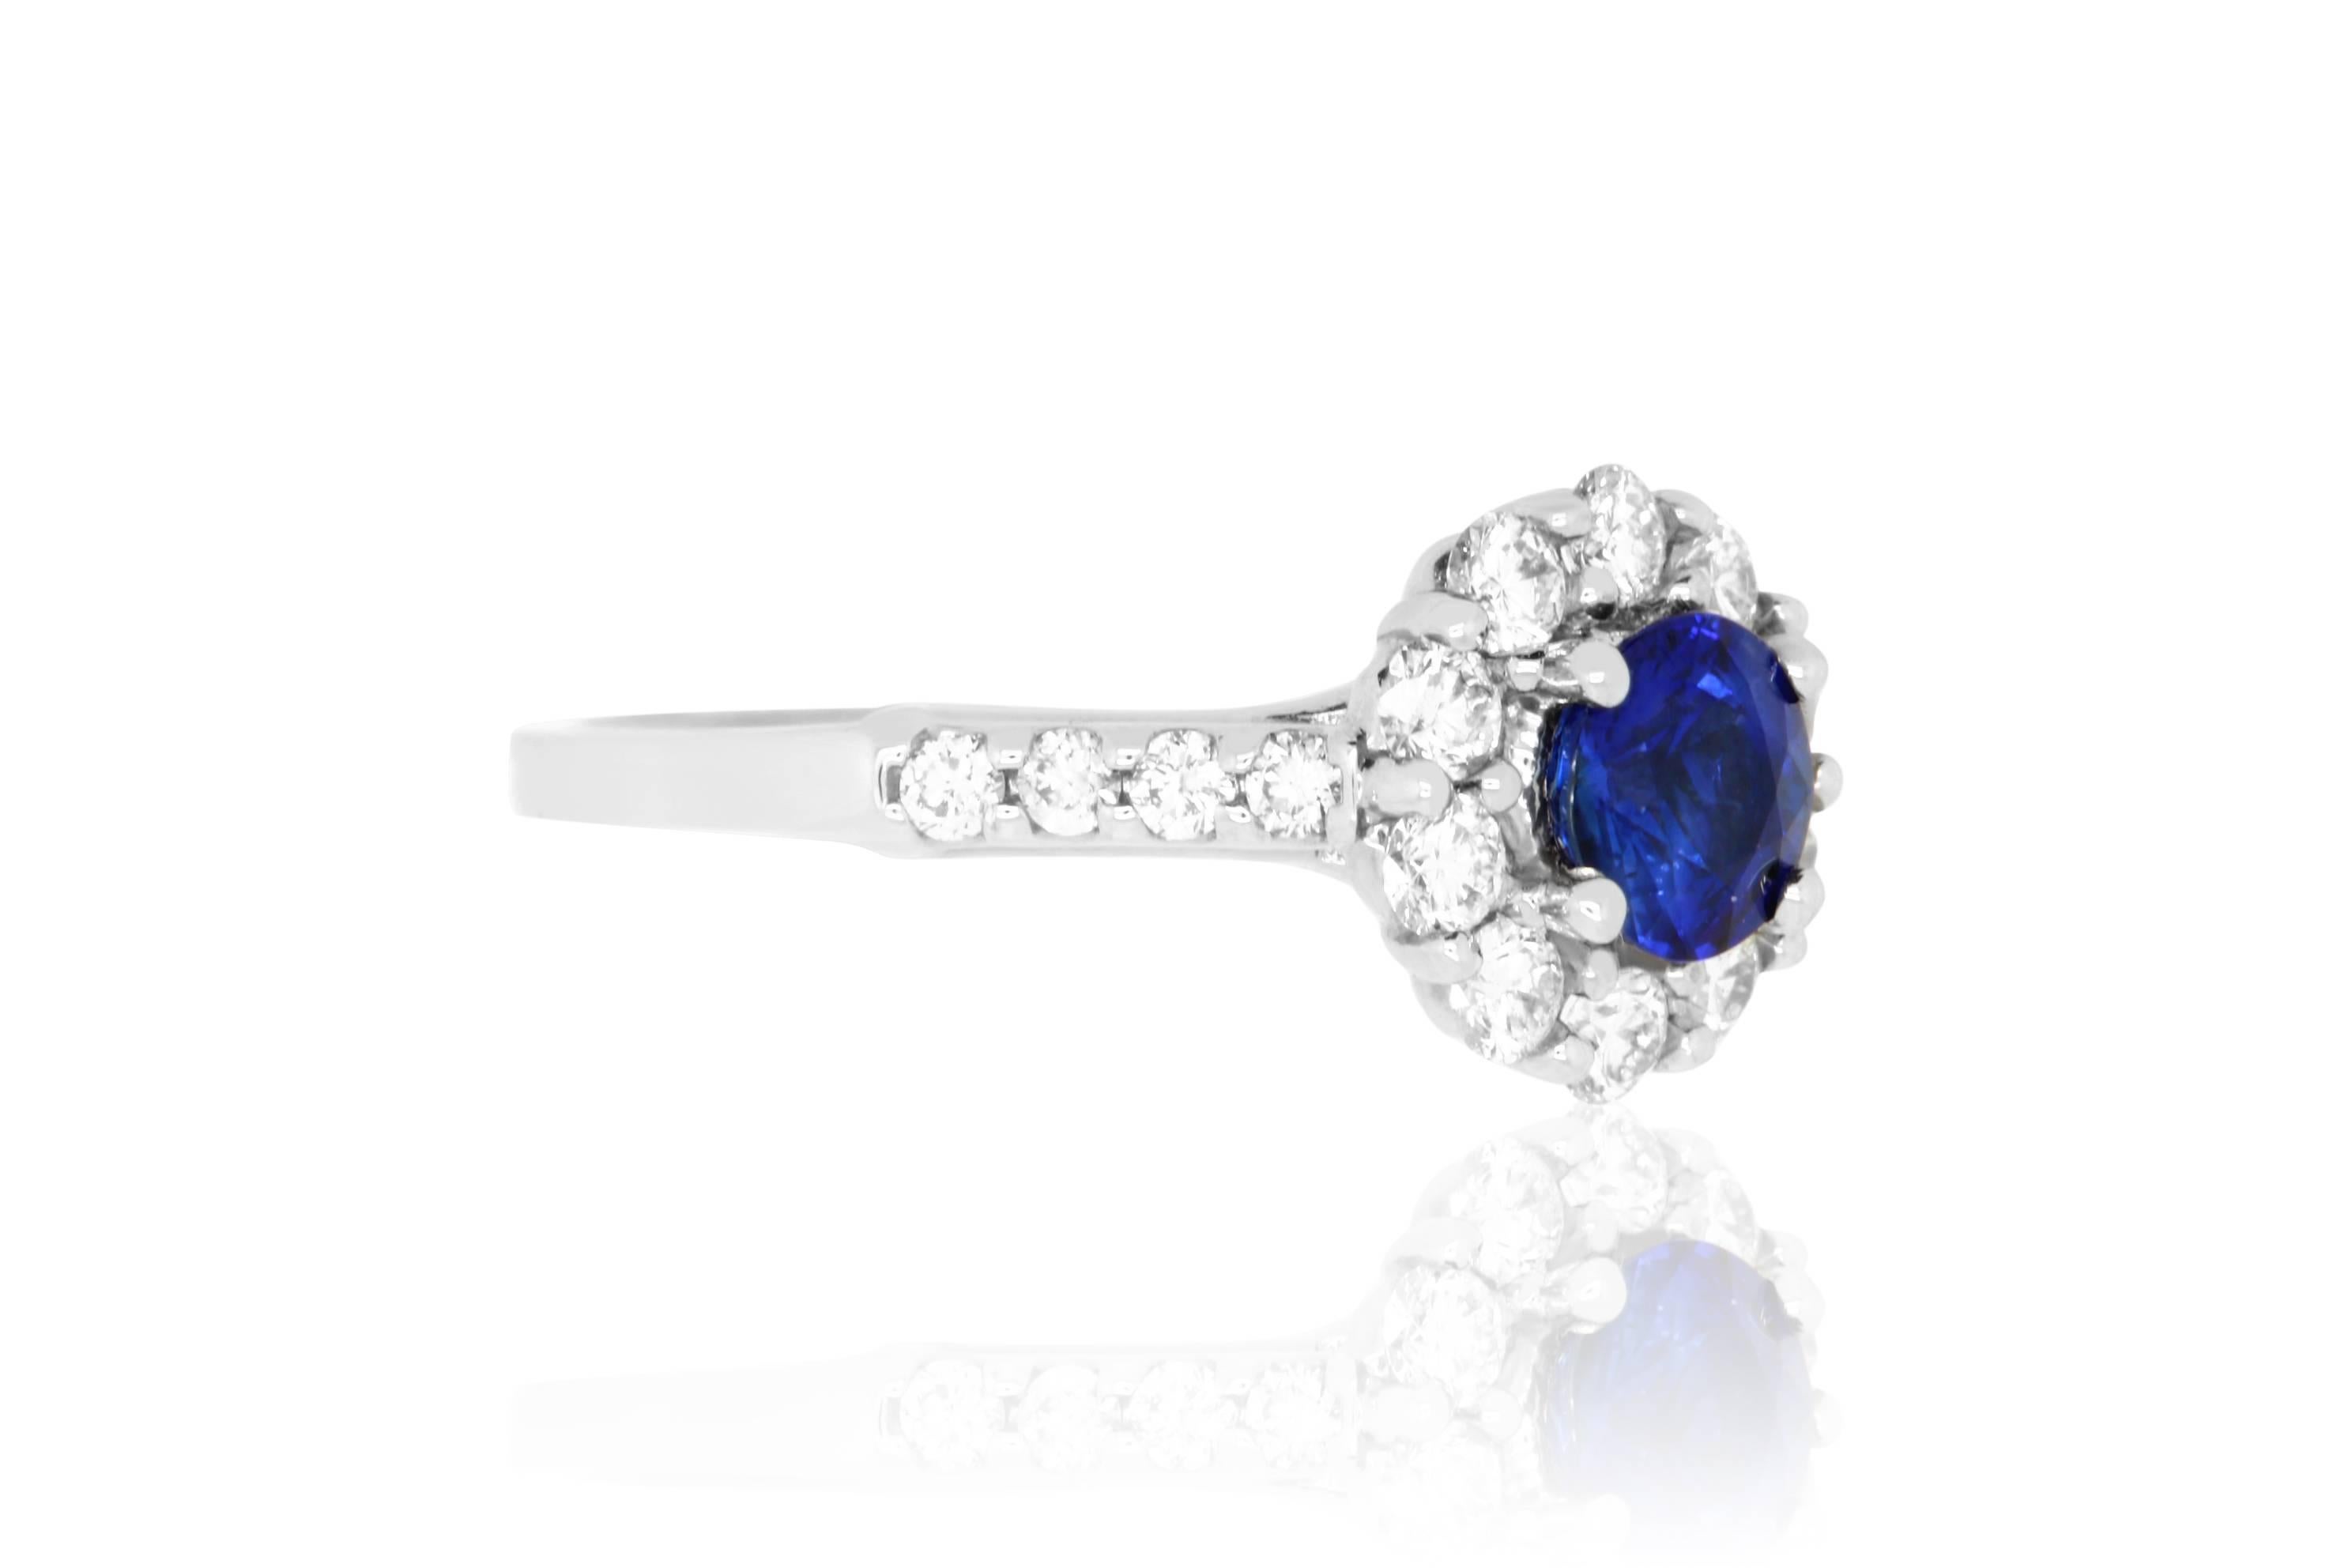 Material: 18k White Gold 
Center Stone Details:  1.08 Carat Blue Sapphire
Mounting Diamond Details: 18 Round White Diamonds Approximately 0.85 Carats - Clarity: SI / Color: H-I
Ring Size: Size 6.5 (can be sized)

Fine one-of-a kind craftsmanship